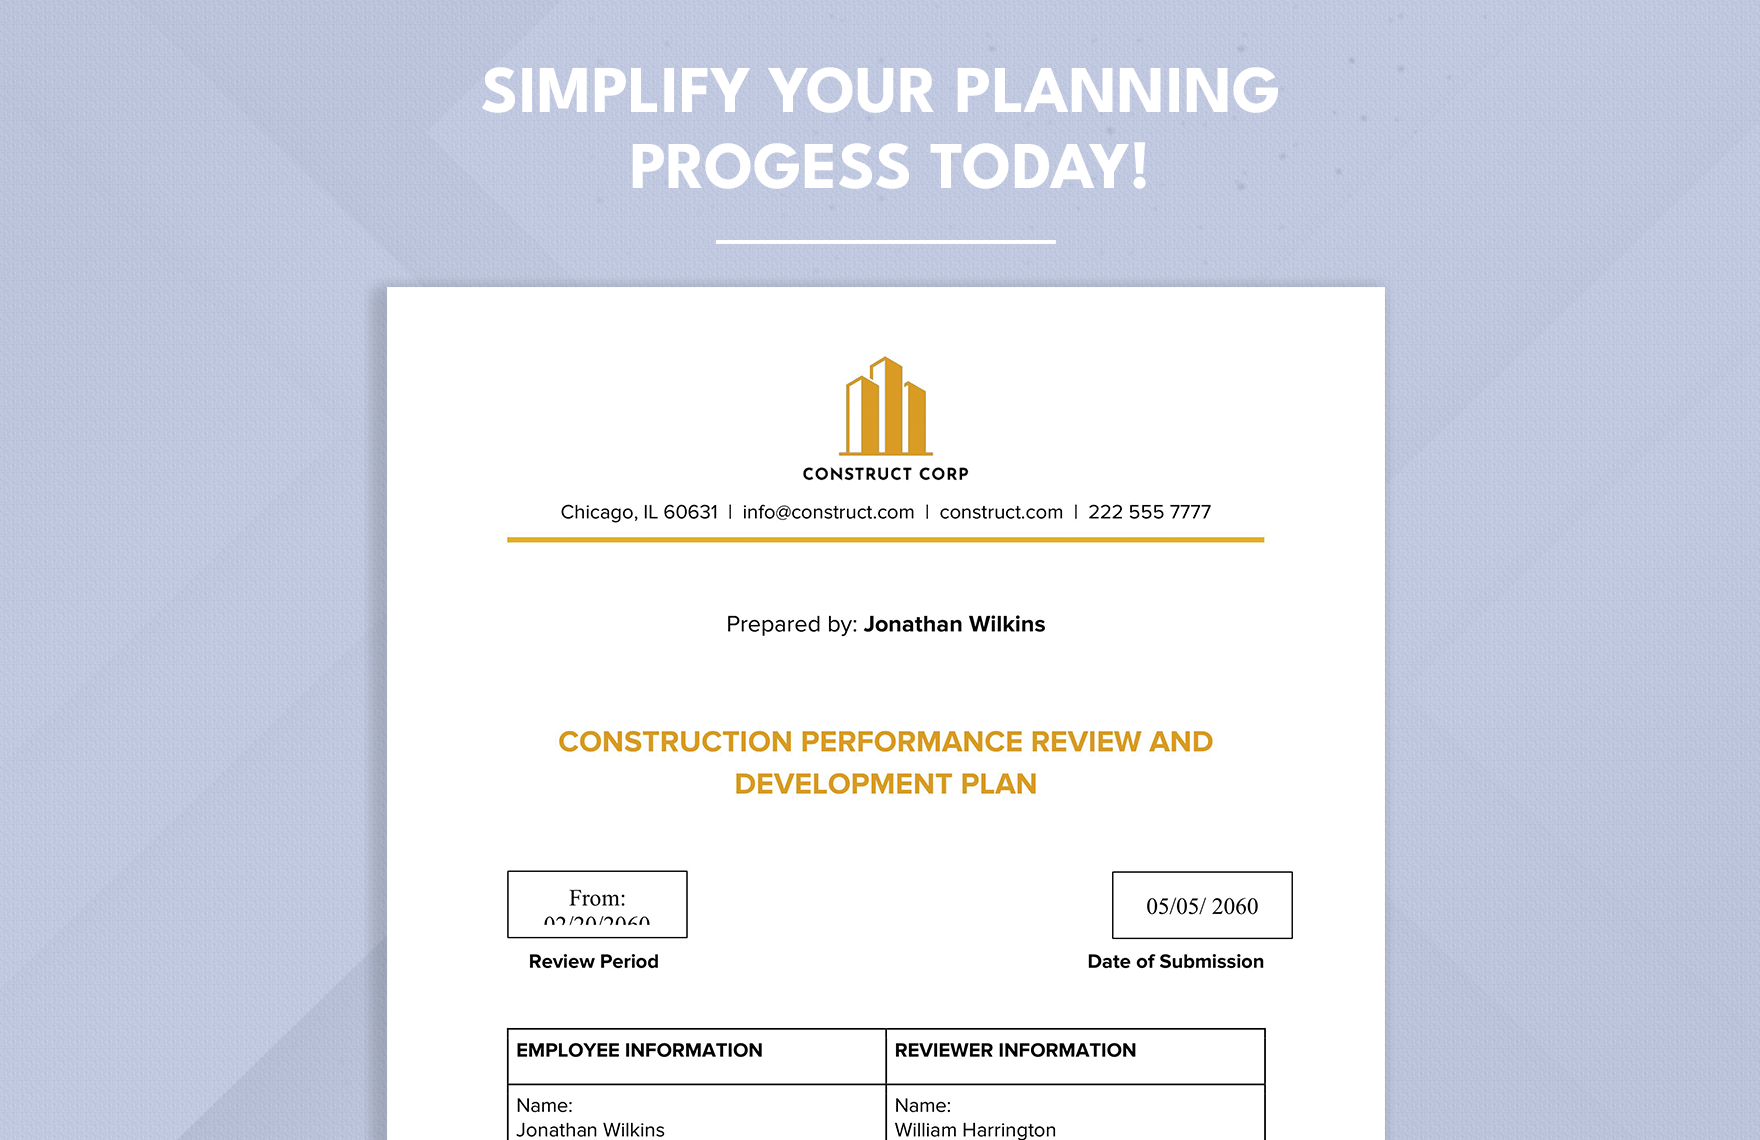 Construction Performance Review and Development Plan